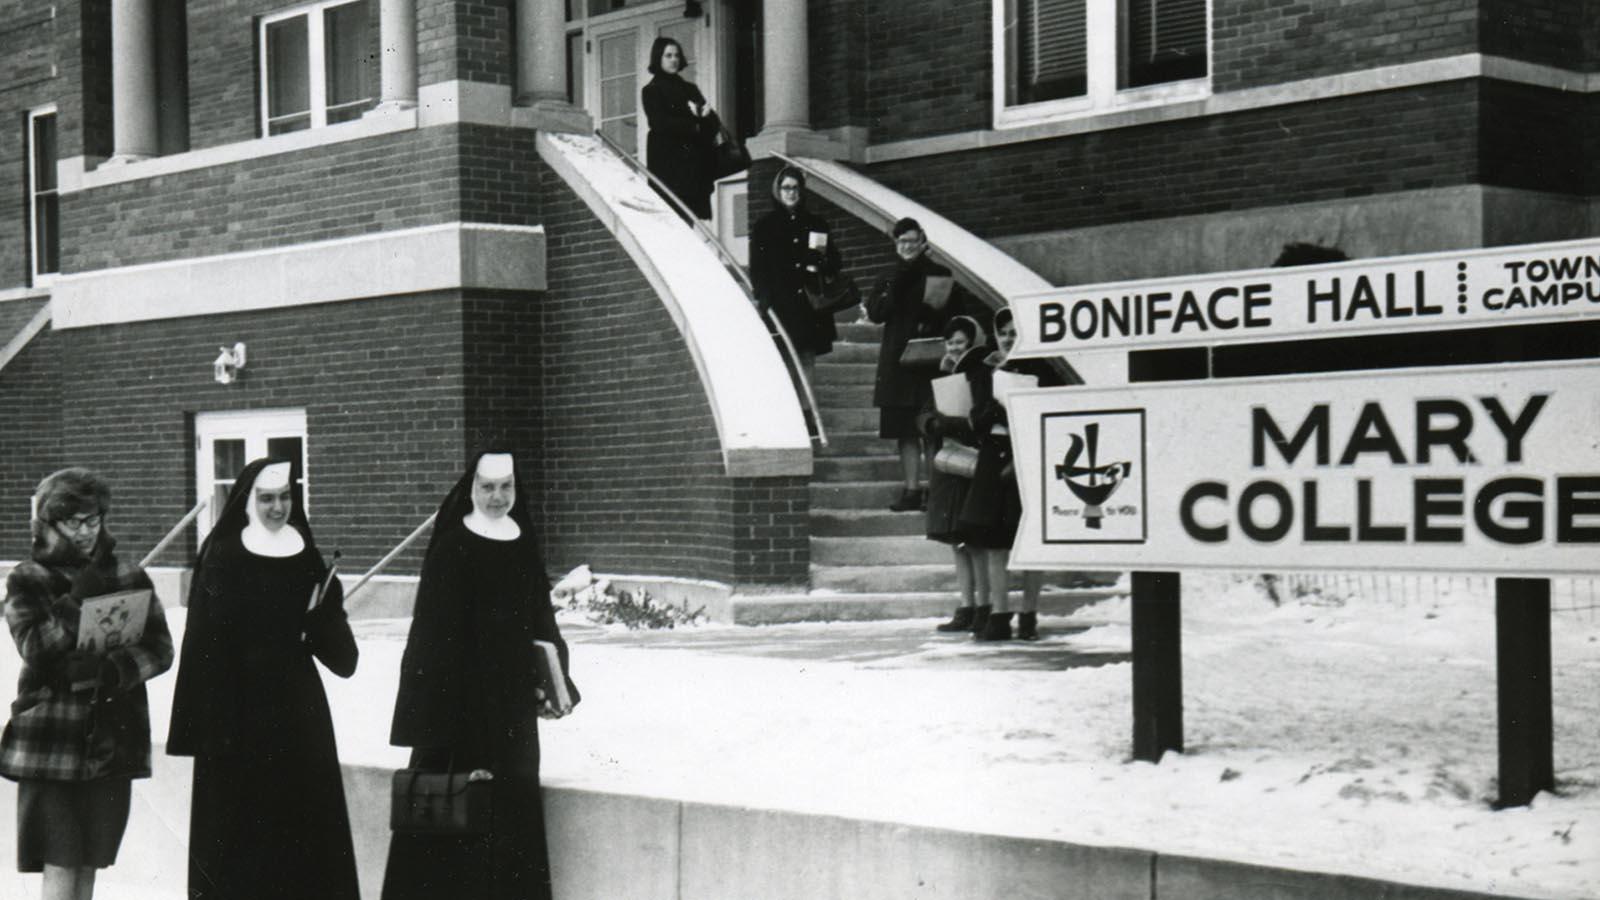 Historic image of Sisters and students standing outside Boniface Hall at the Mary College Town Campus